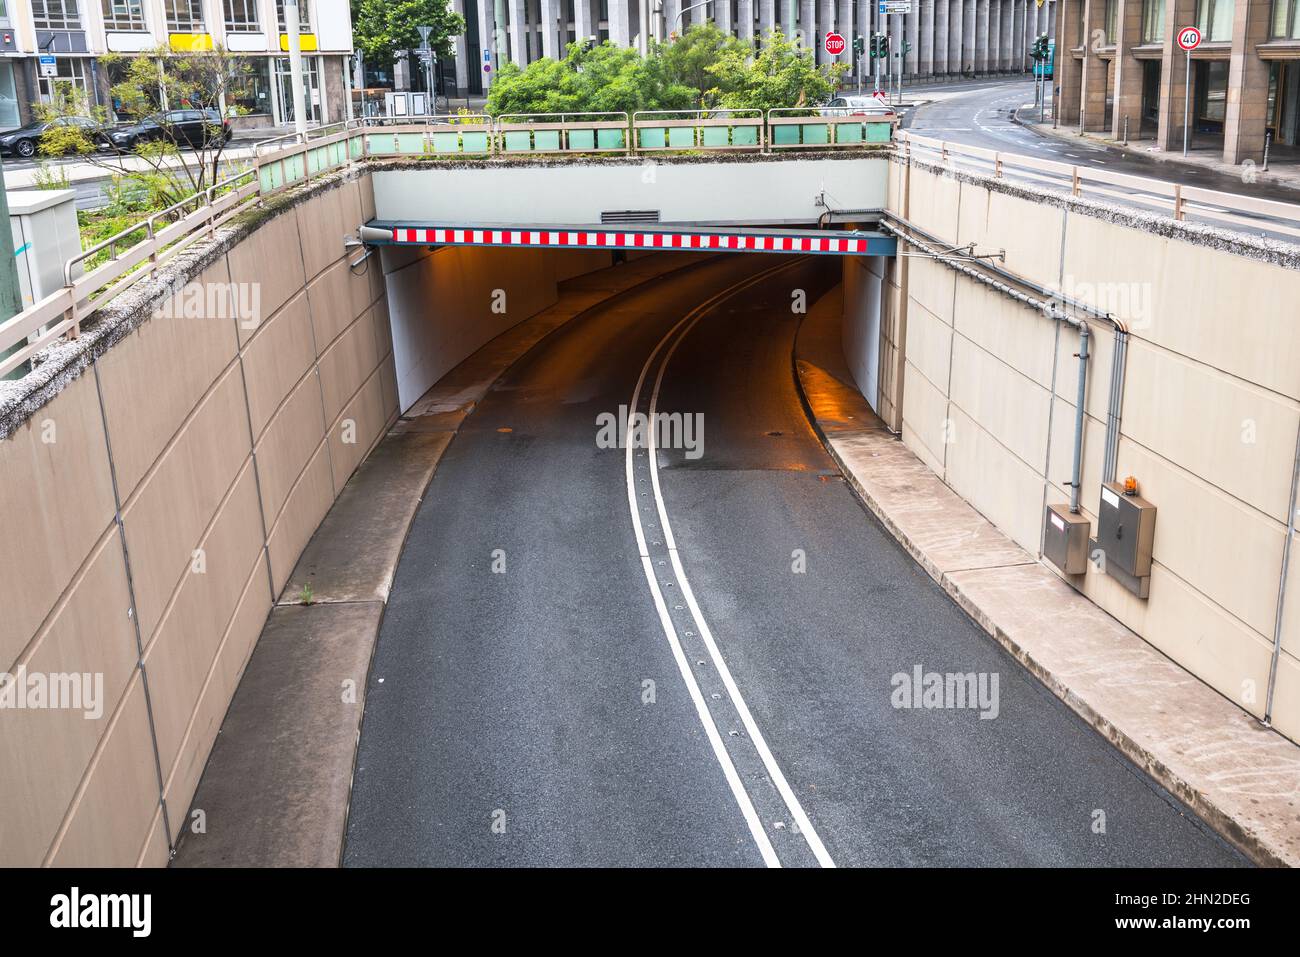 Road tunnel running under a street in a city centre Stock Photo